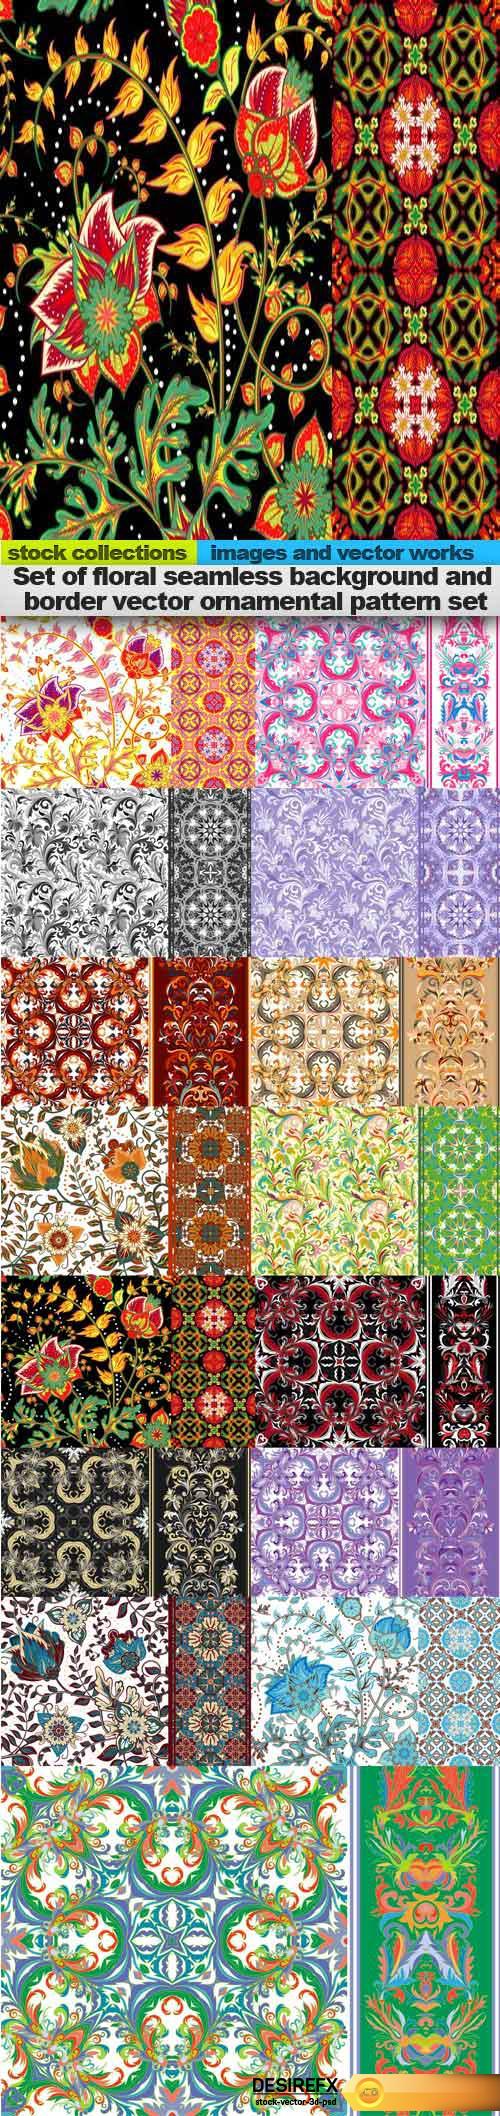 Set of floral seamless background and border vector ornamental pattern set, 15 x EPS